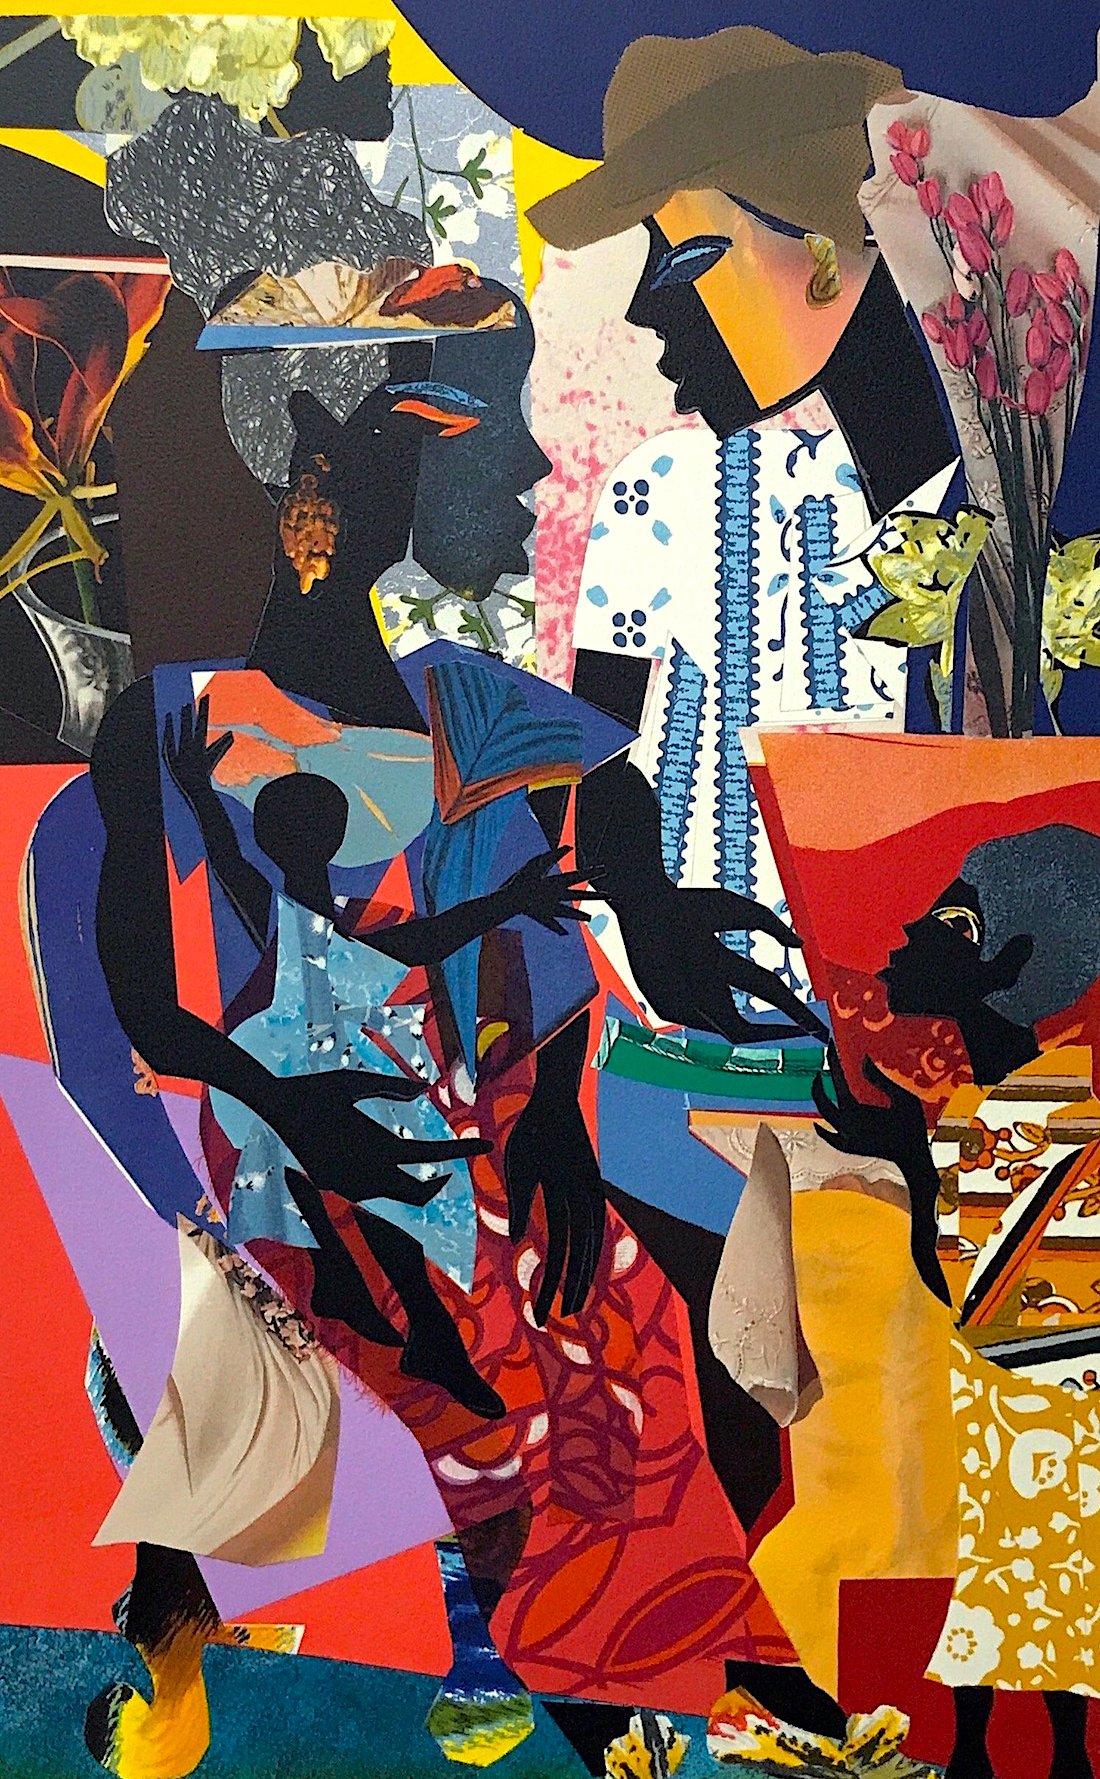 James Denmark Figurative Print - THE FAMILY, Signed Lithograph, Multicolor Collage, African American Heritage